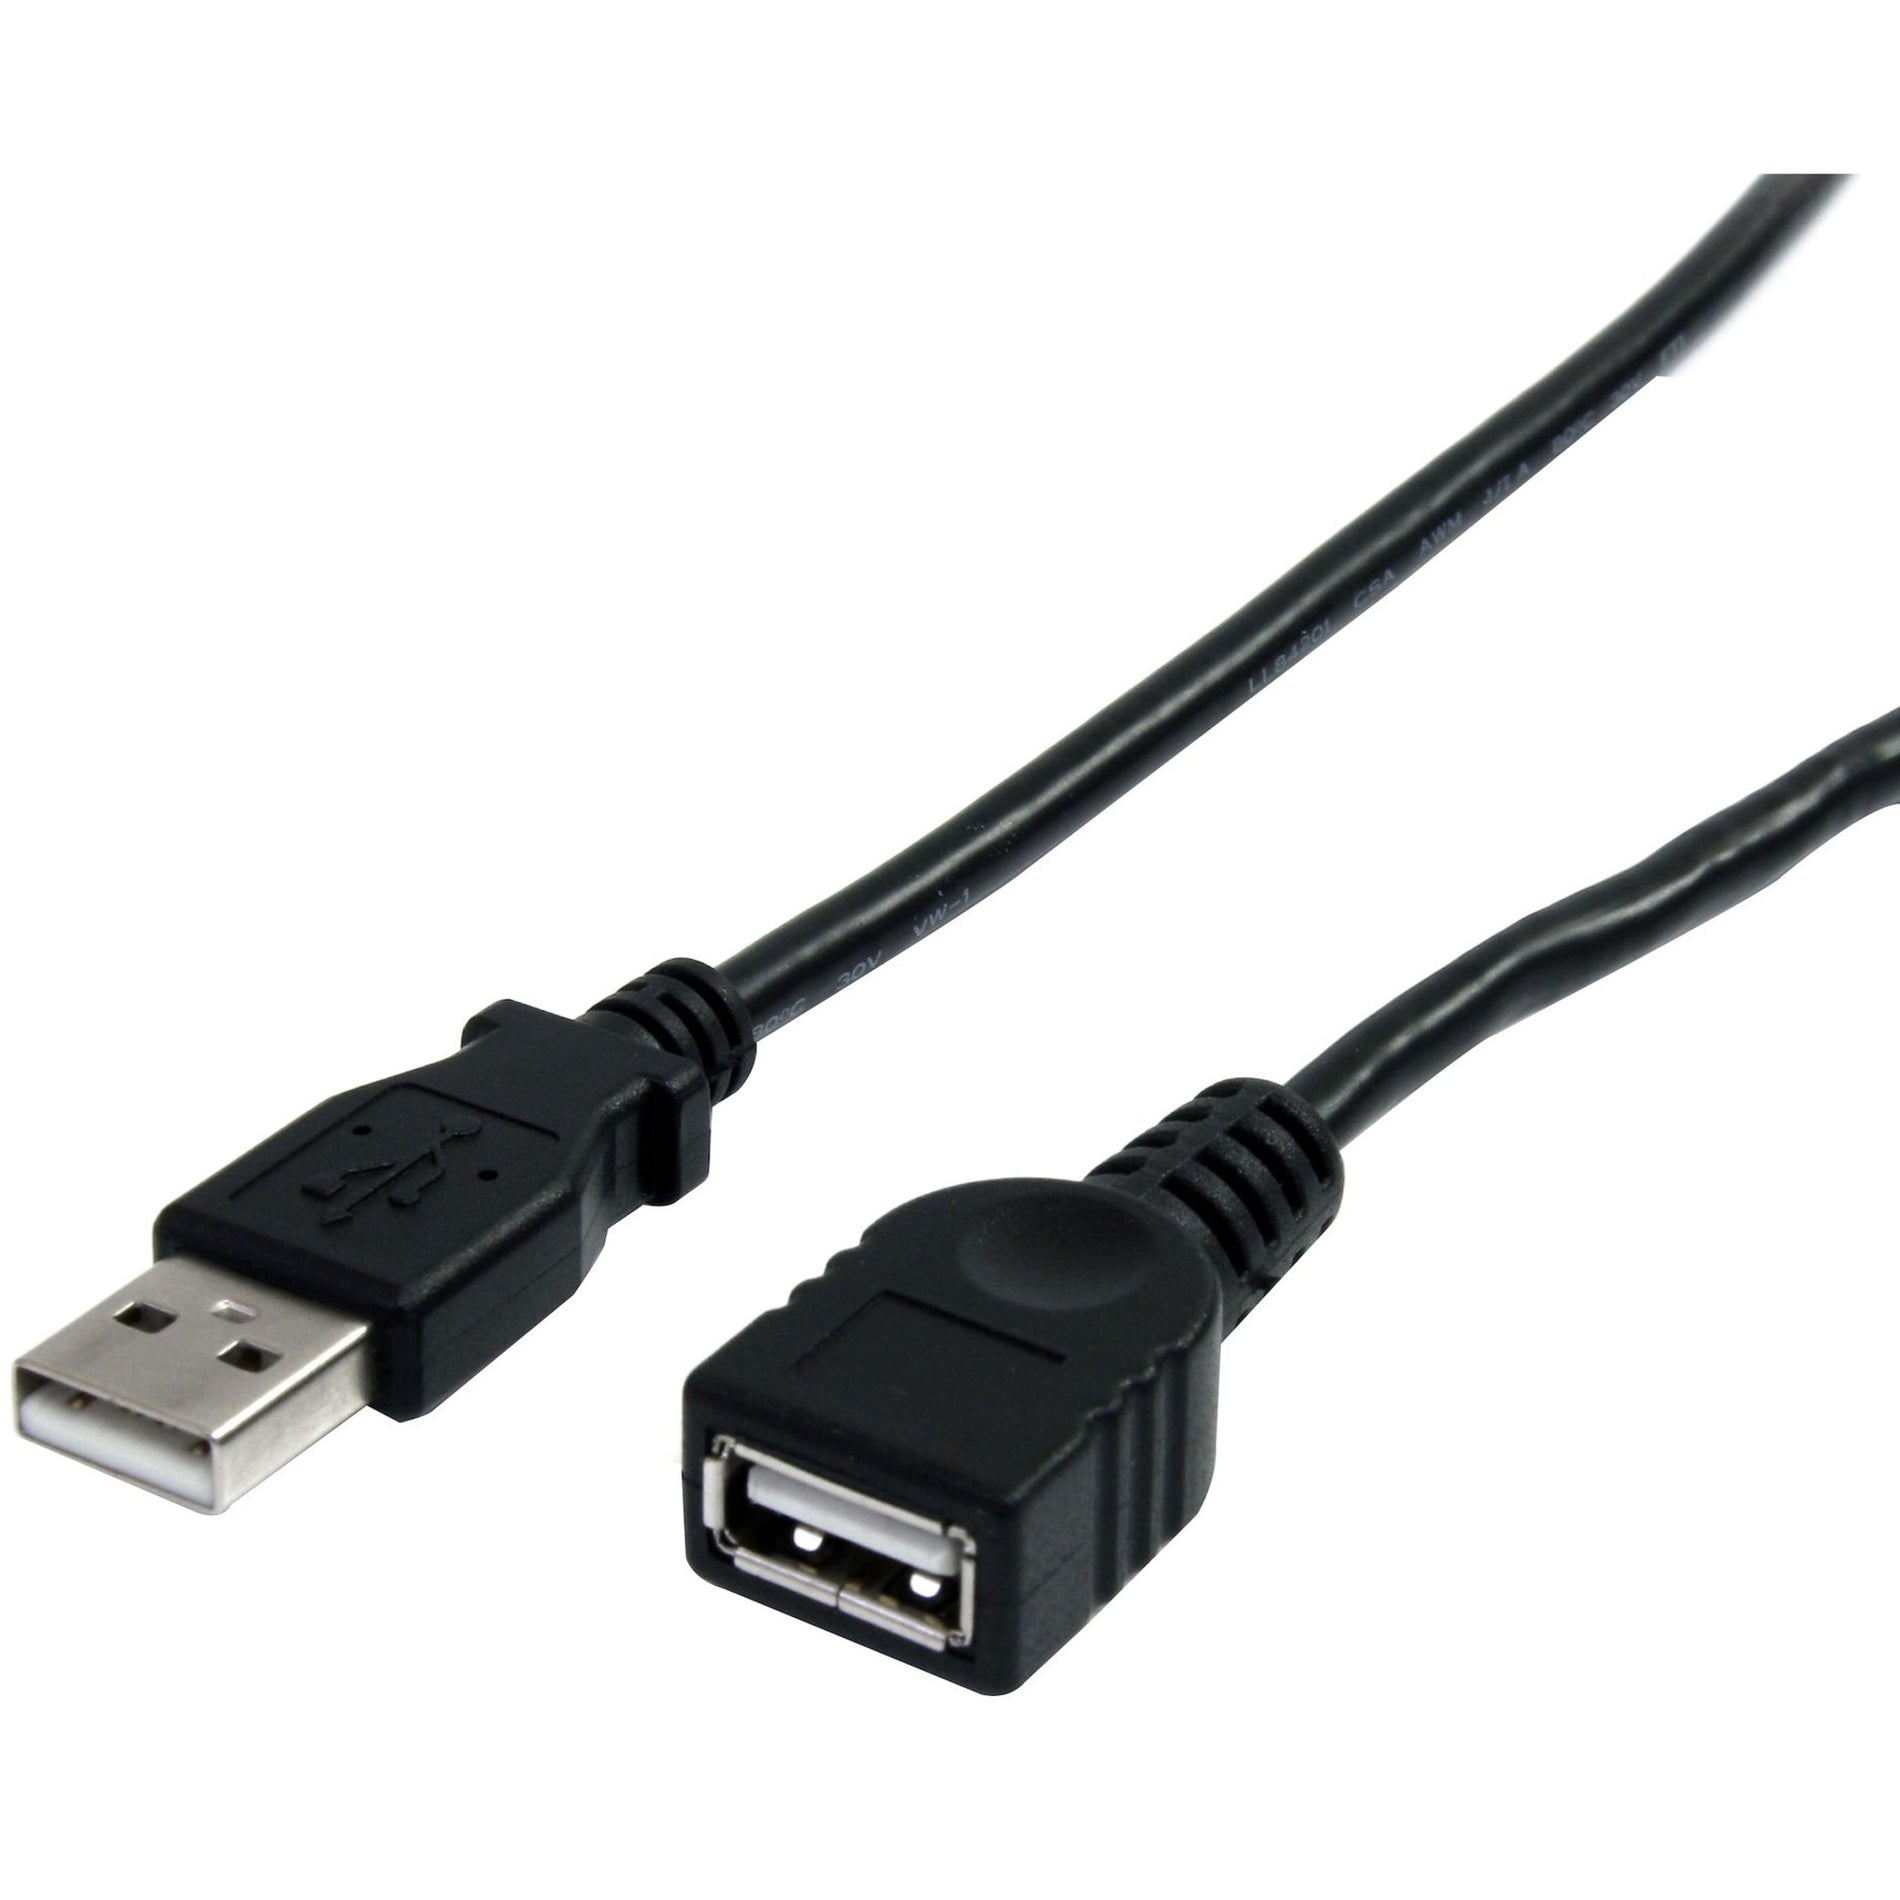 StarTech.com USBEXTAA3BK 3 ft Black USB 2.0 Extension Cable A to A - M/F, Flexible, Molded, Strain Relief, 480 Mbit/s Data Transfer Rate